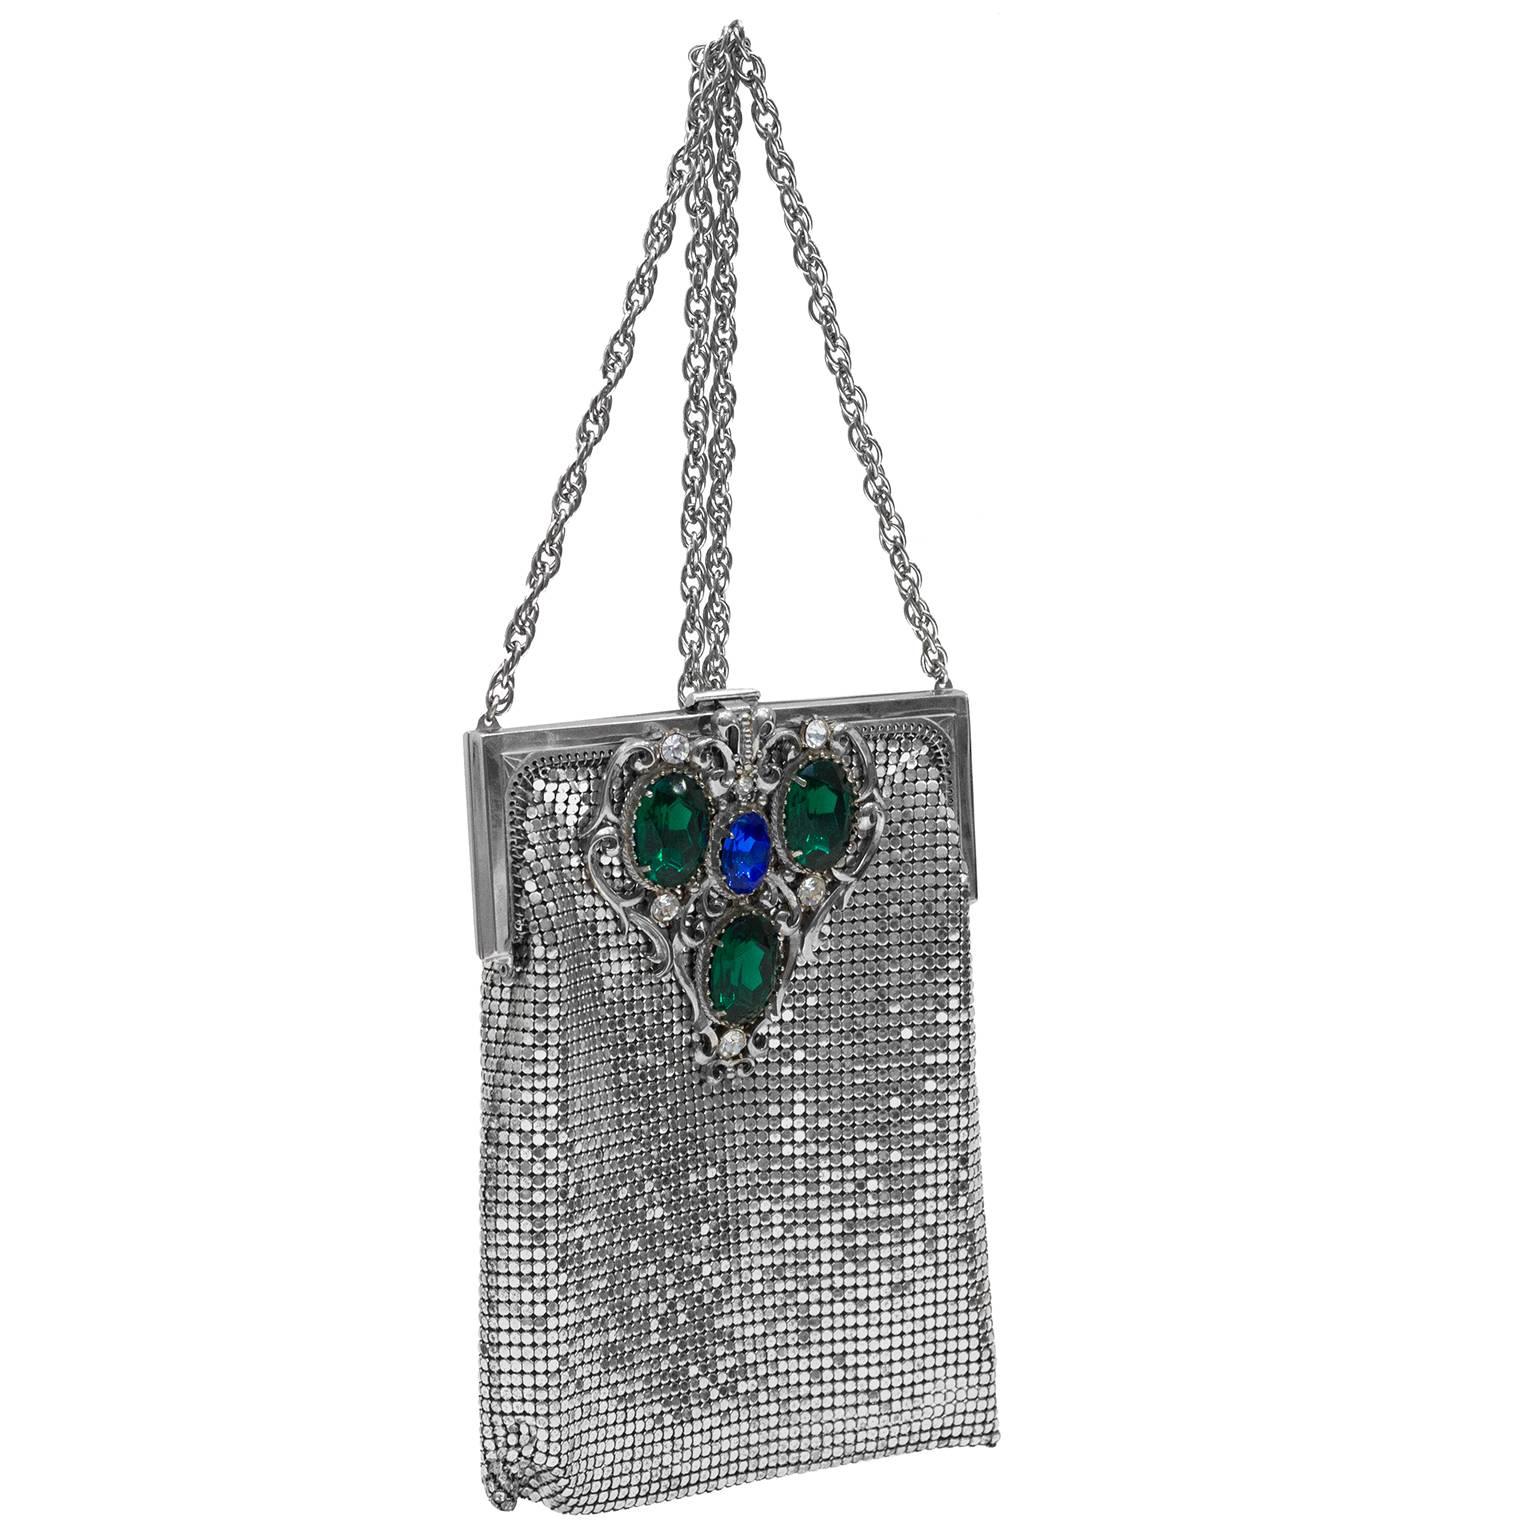 Elegant and glamorous 1940s silver metal mesh evening bag from Whiting and Davis. Beautiful 17